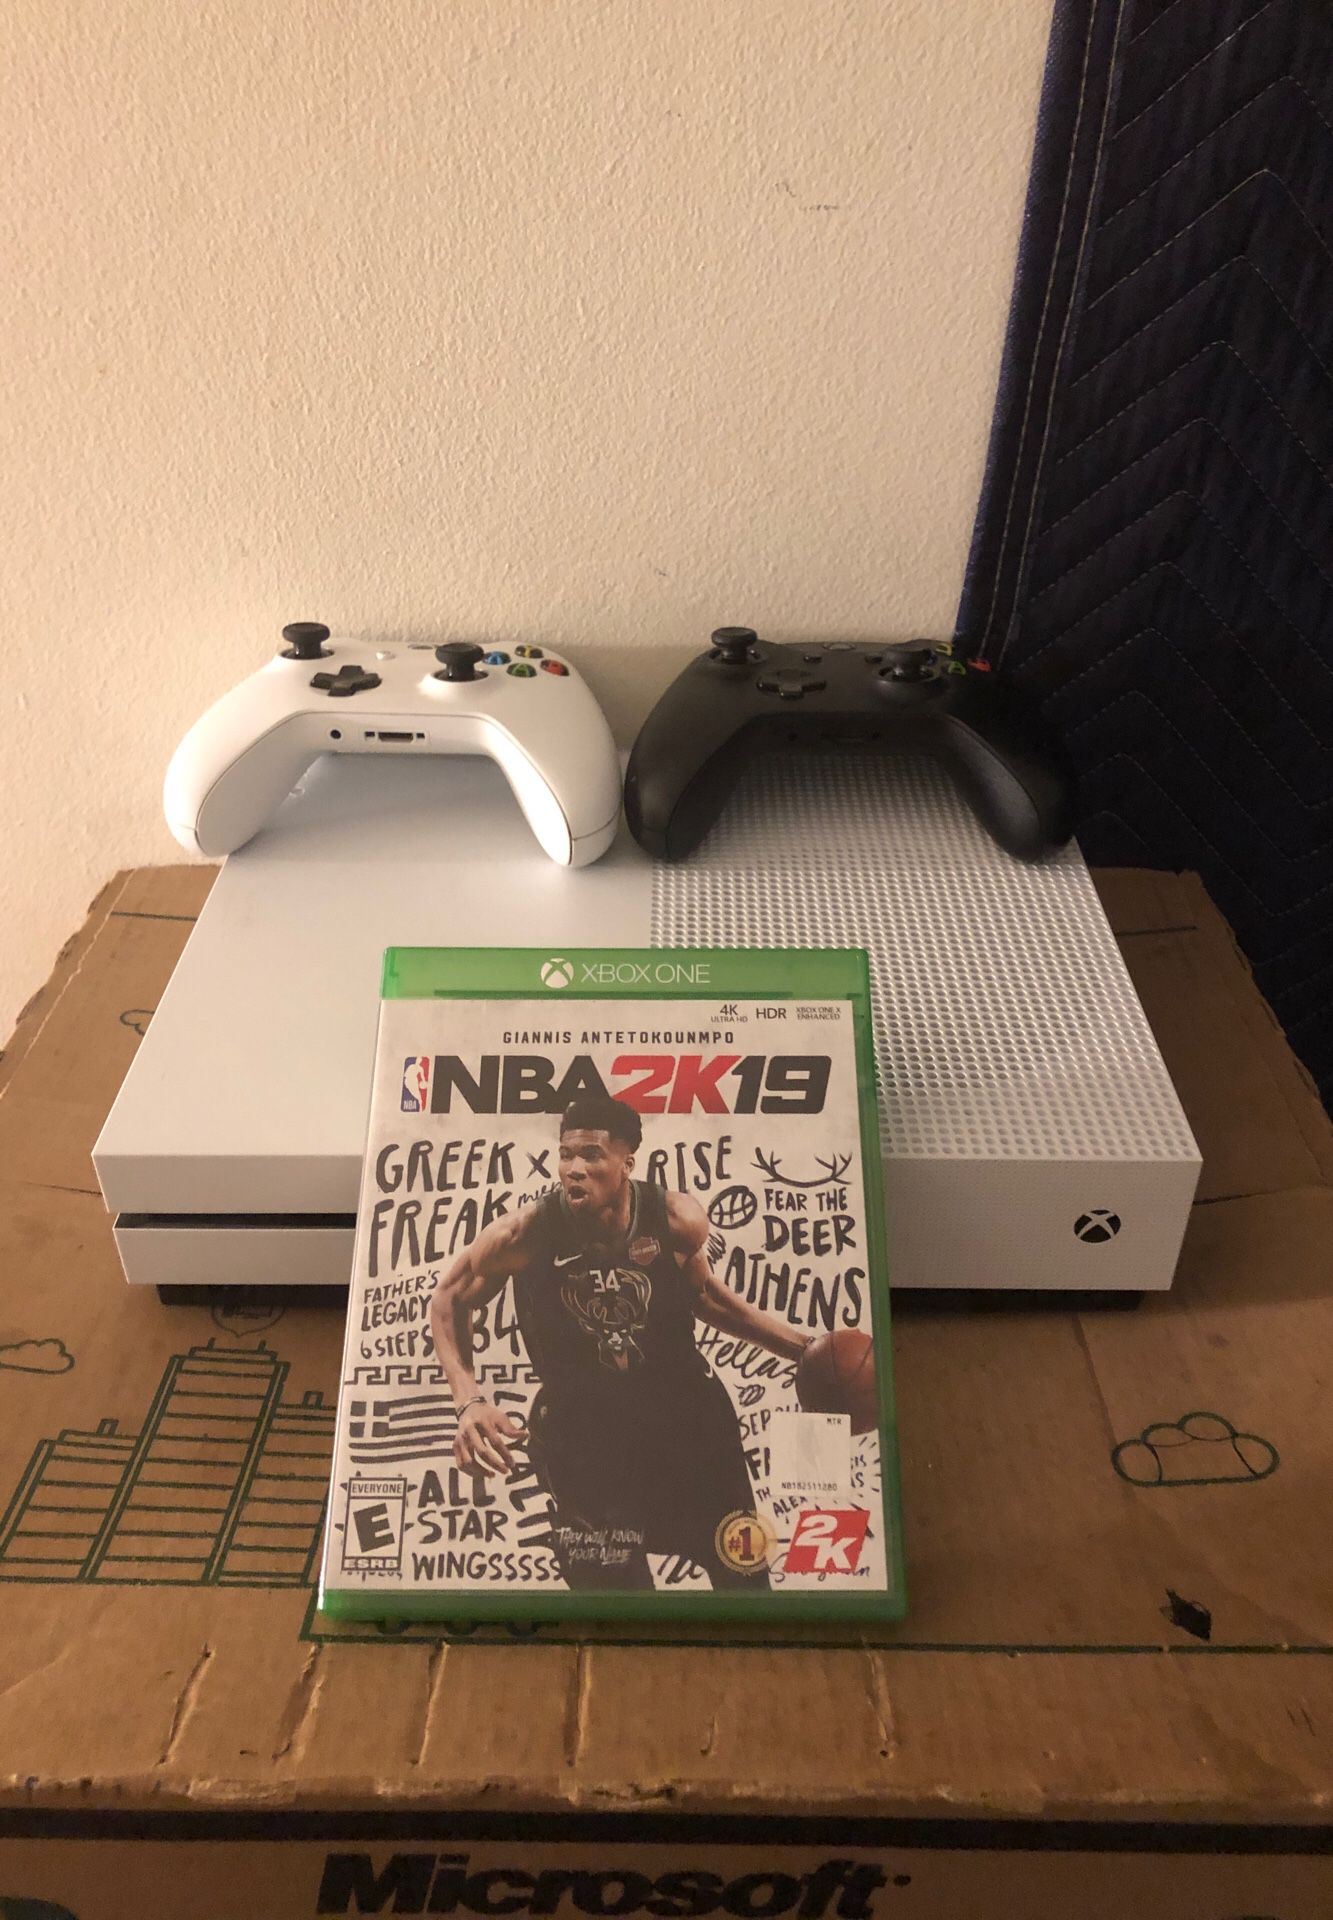 Xbox one s with two controllers & 2k19